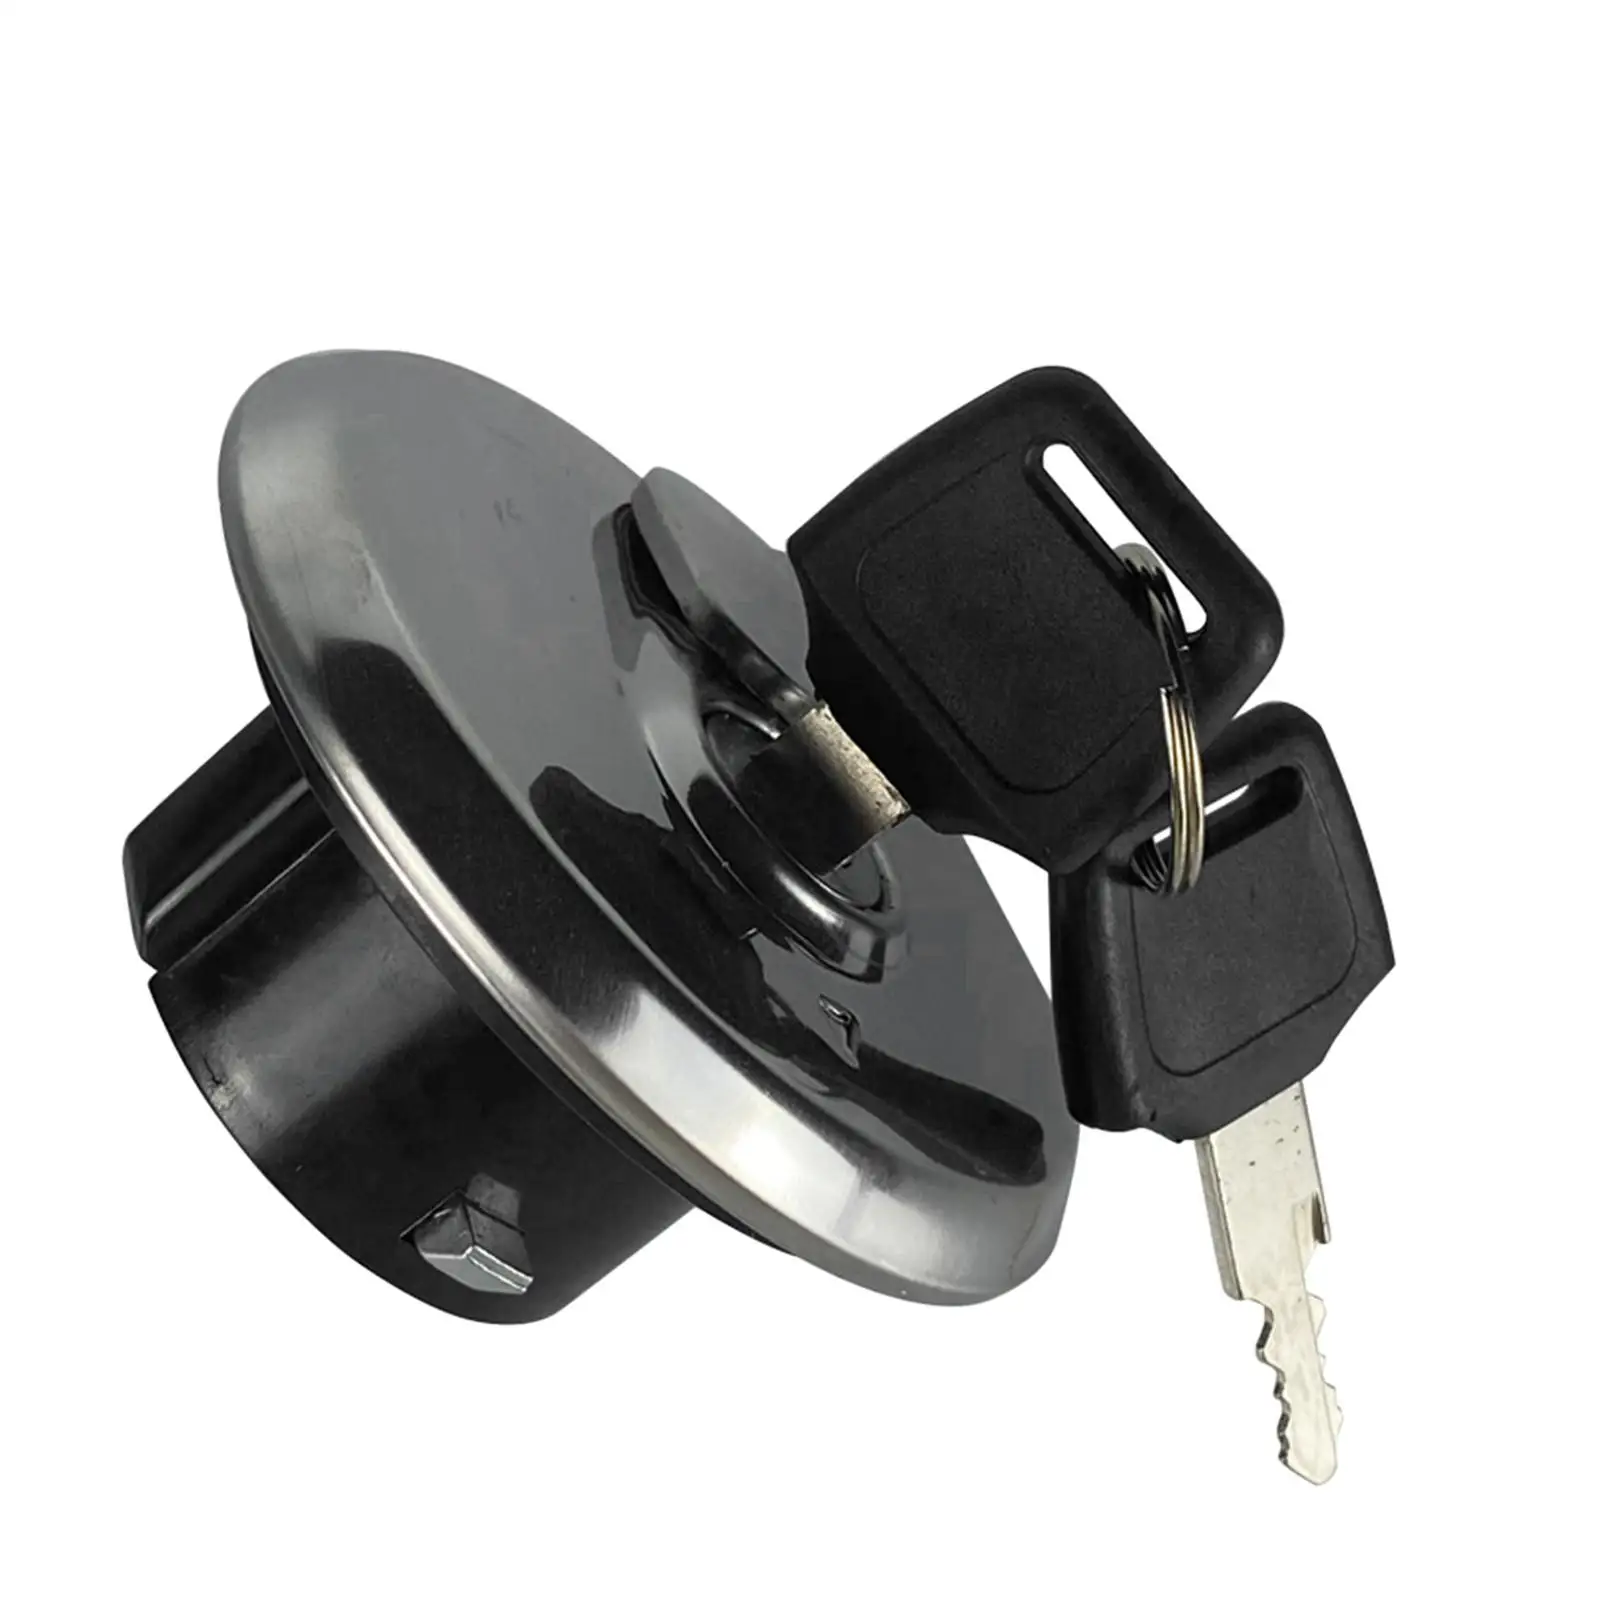 Aluminum Alloy Motorcycle Fuel Gas Tank Cap Cover with Lock Keys Replacement for Suzuki Gn125 Supplies Parts Accessories